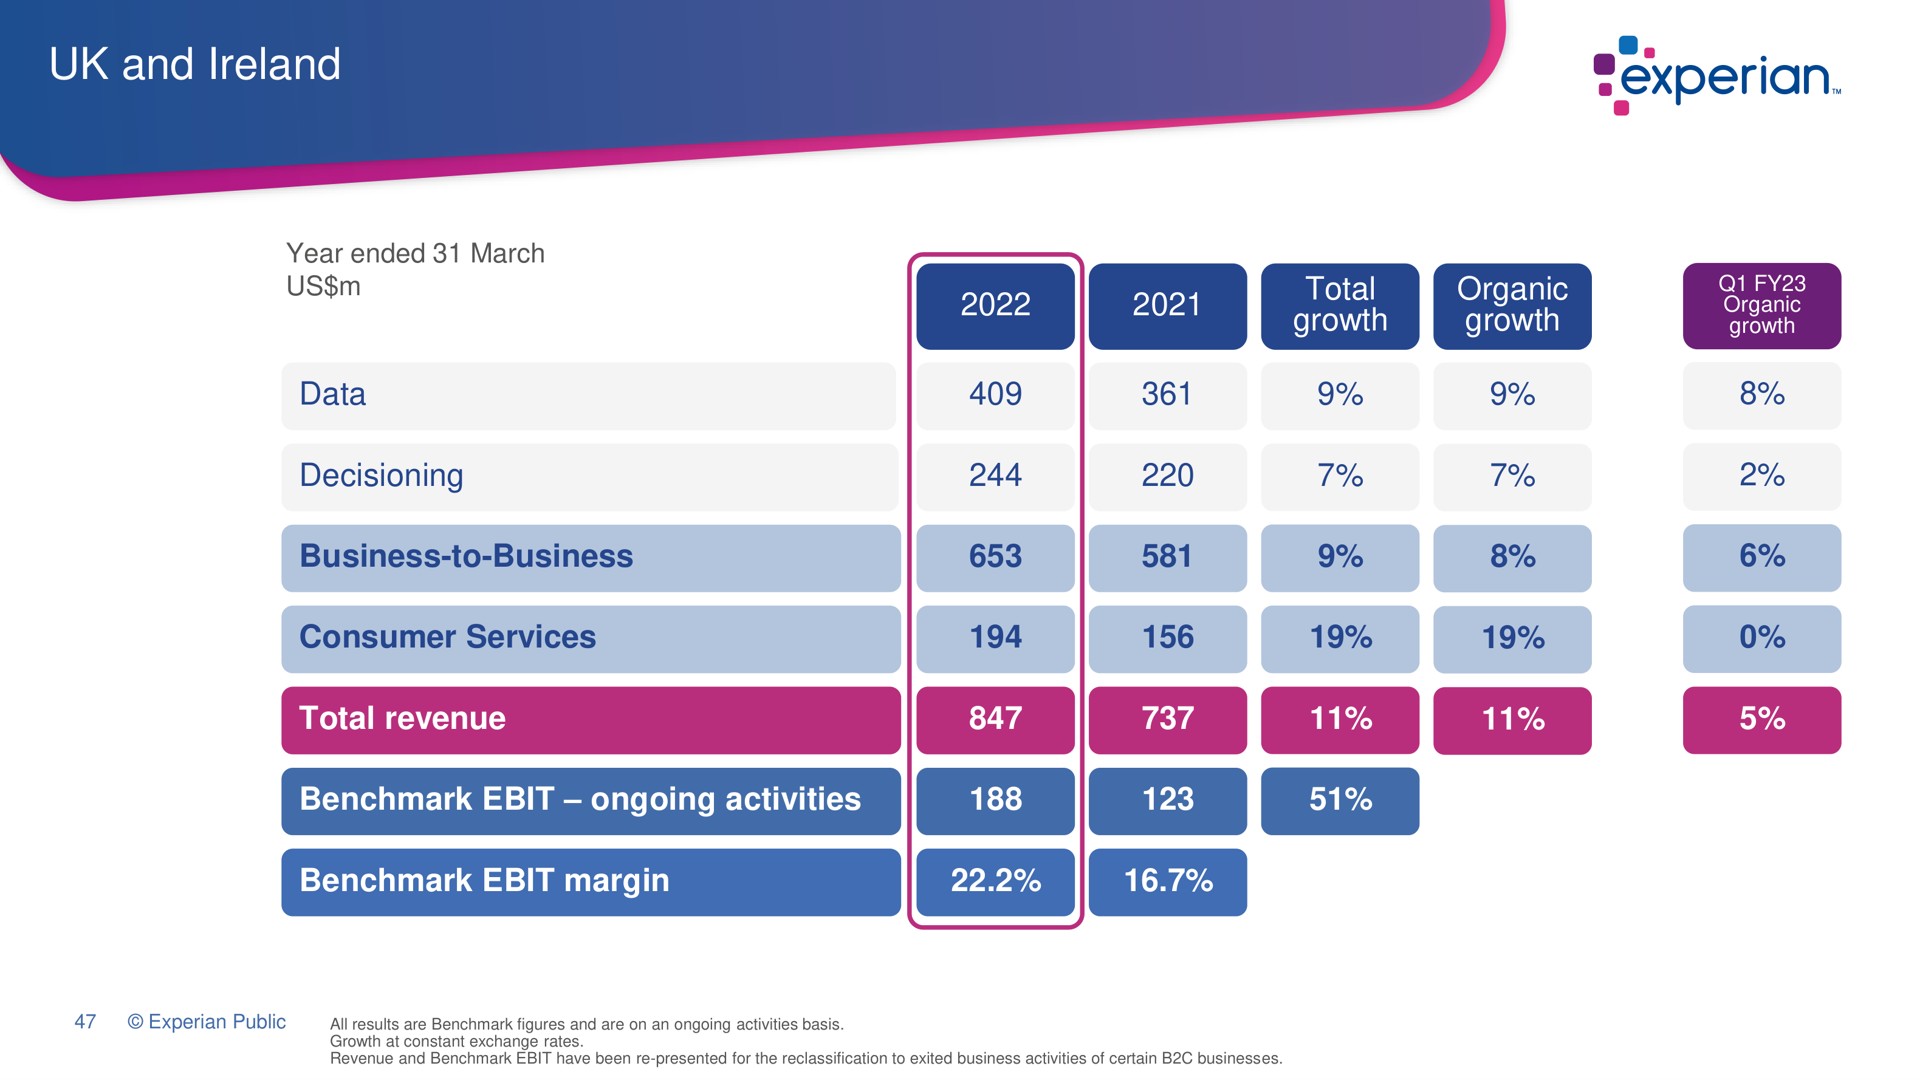 and data business to business consumer services total revenue ongoing activities total growth organic growth margin | Experian